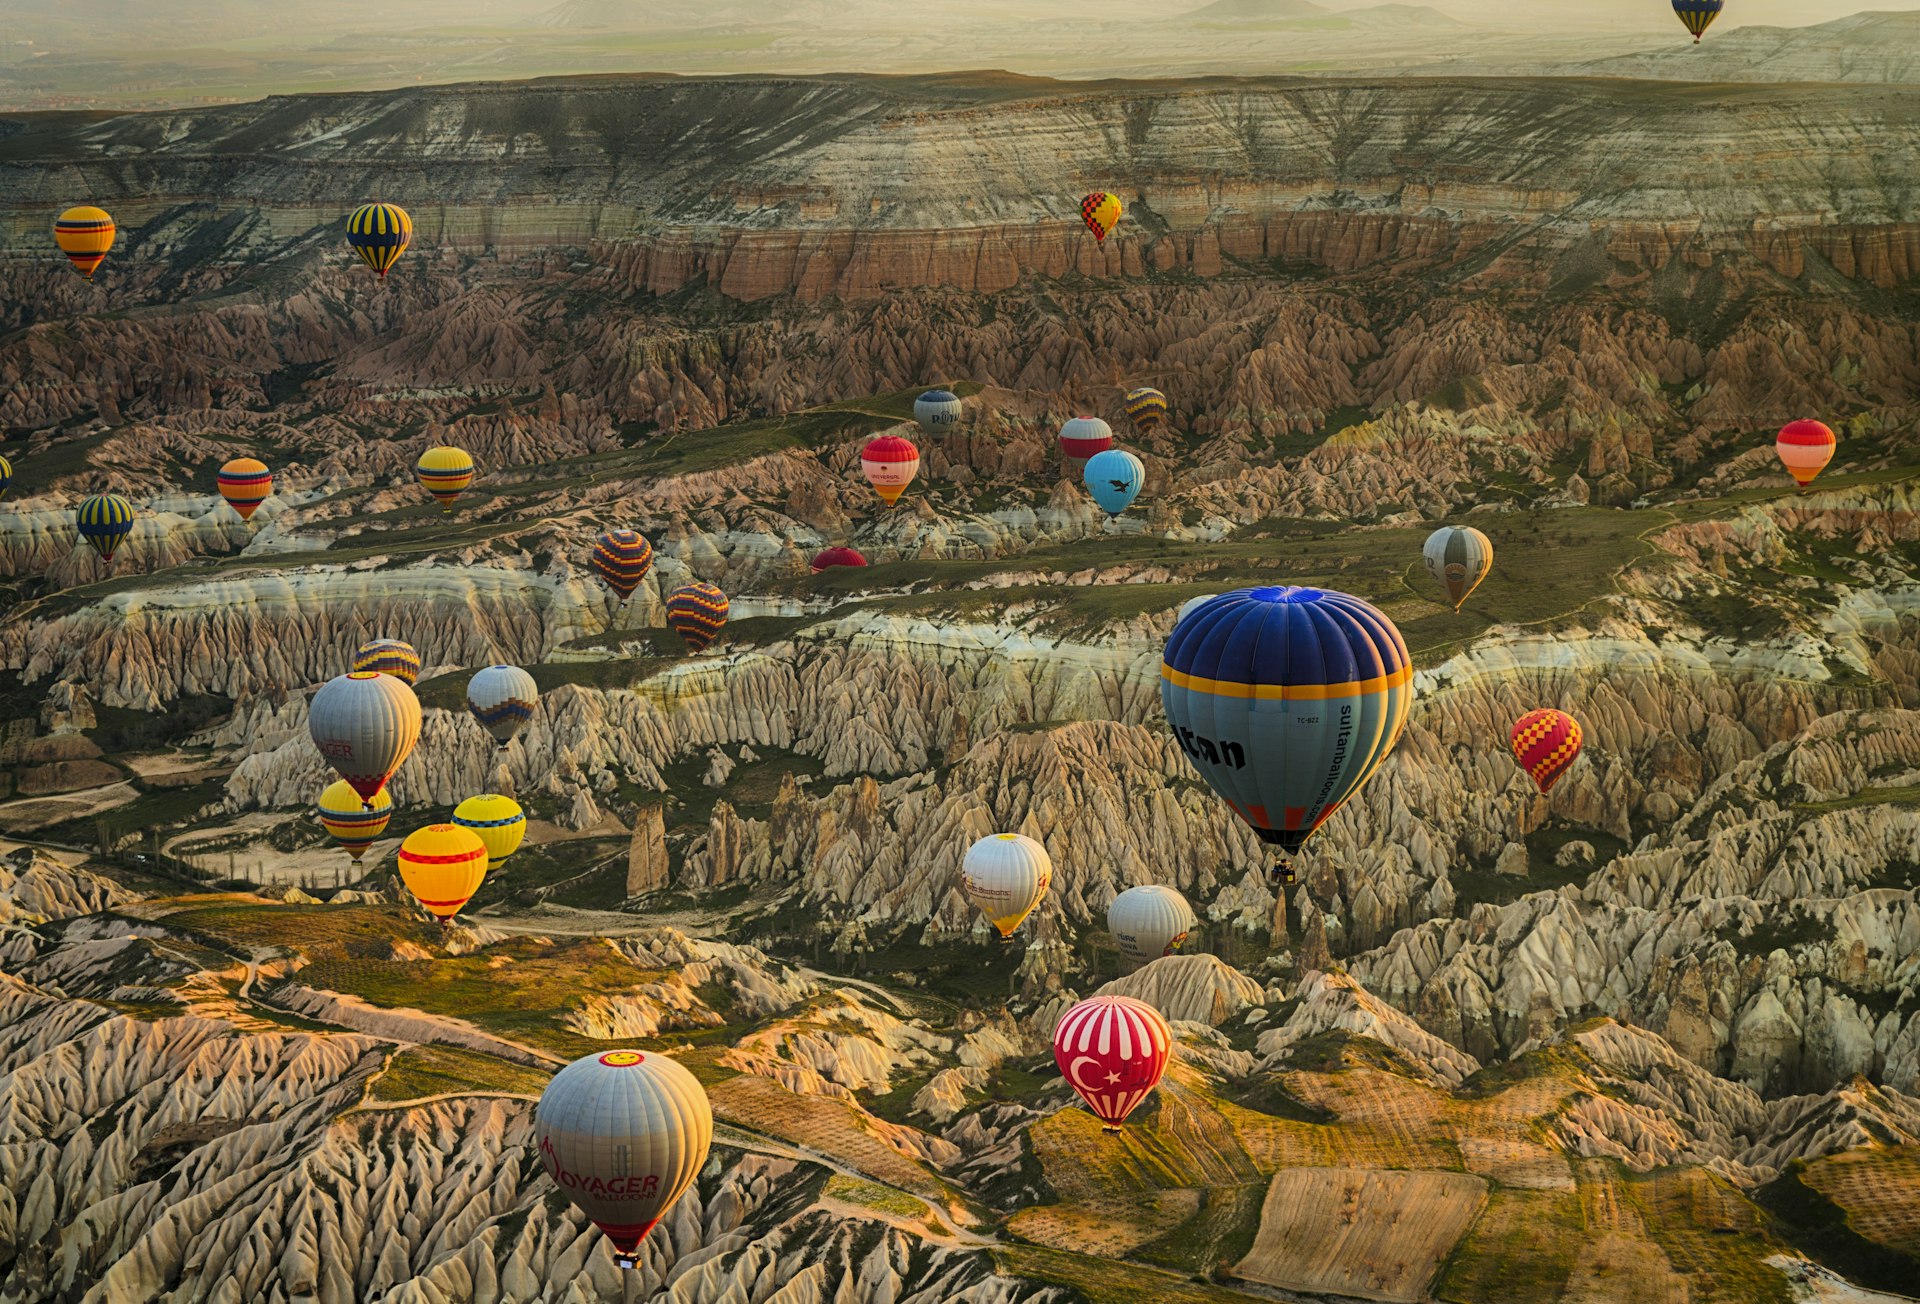 Aerial shot of brightly colored hot air balloons over a landscape with a lot of hills, exposed rock, and other geological features